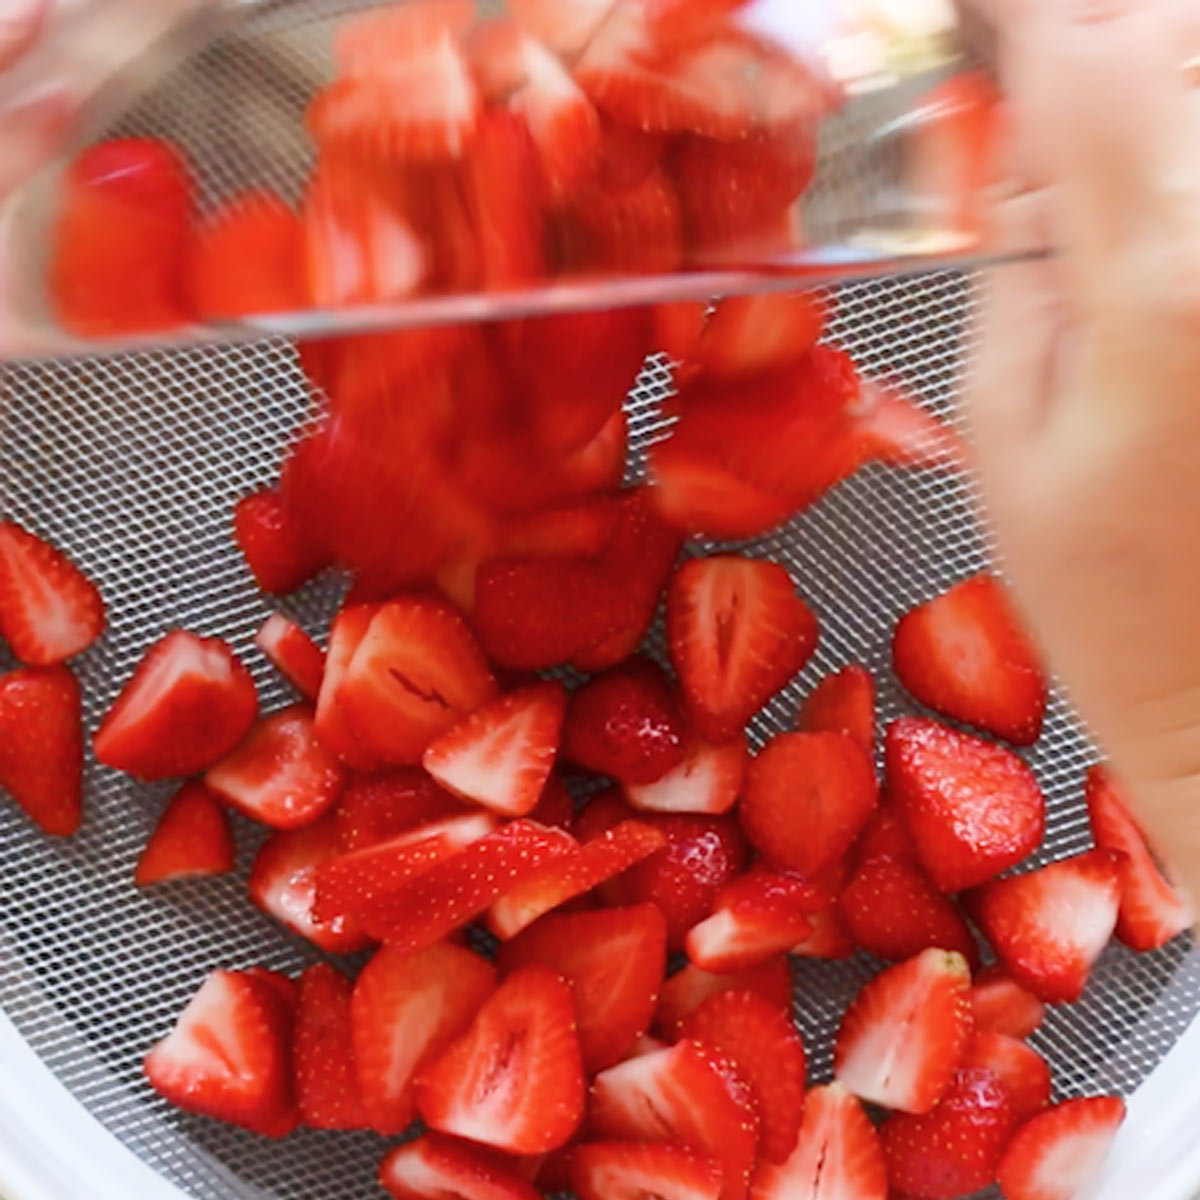 placing strawberries on the dehydrator tray